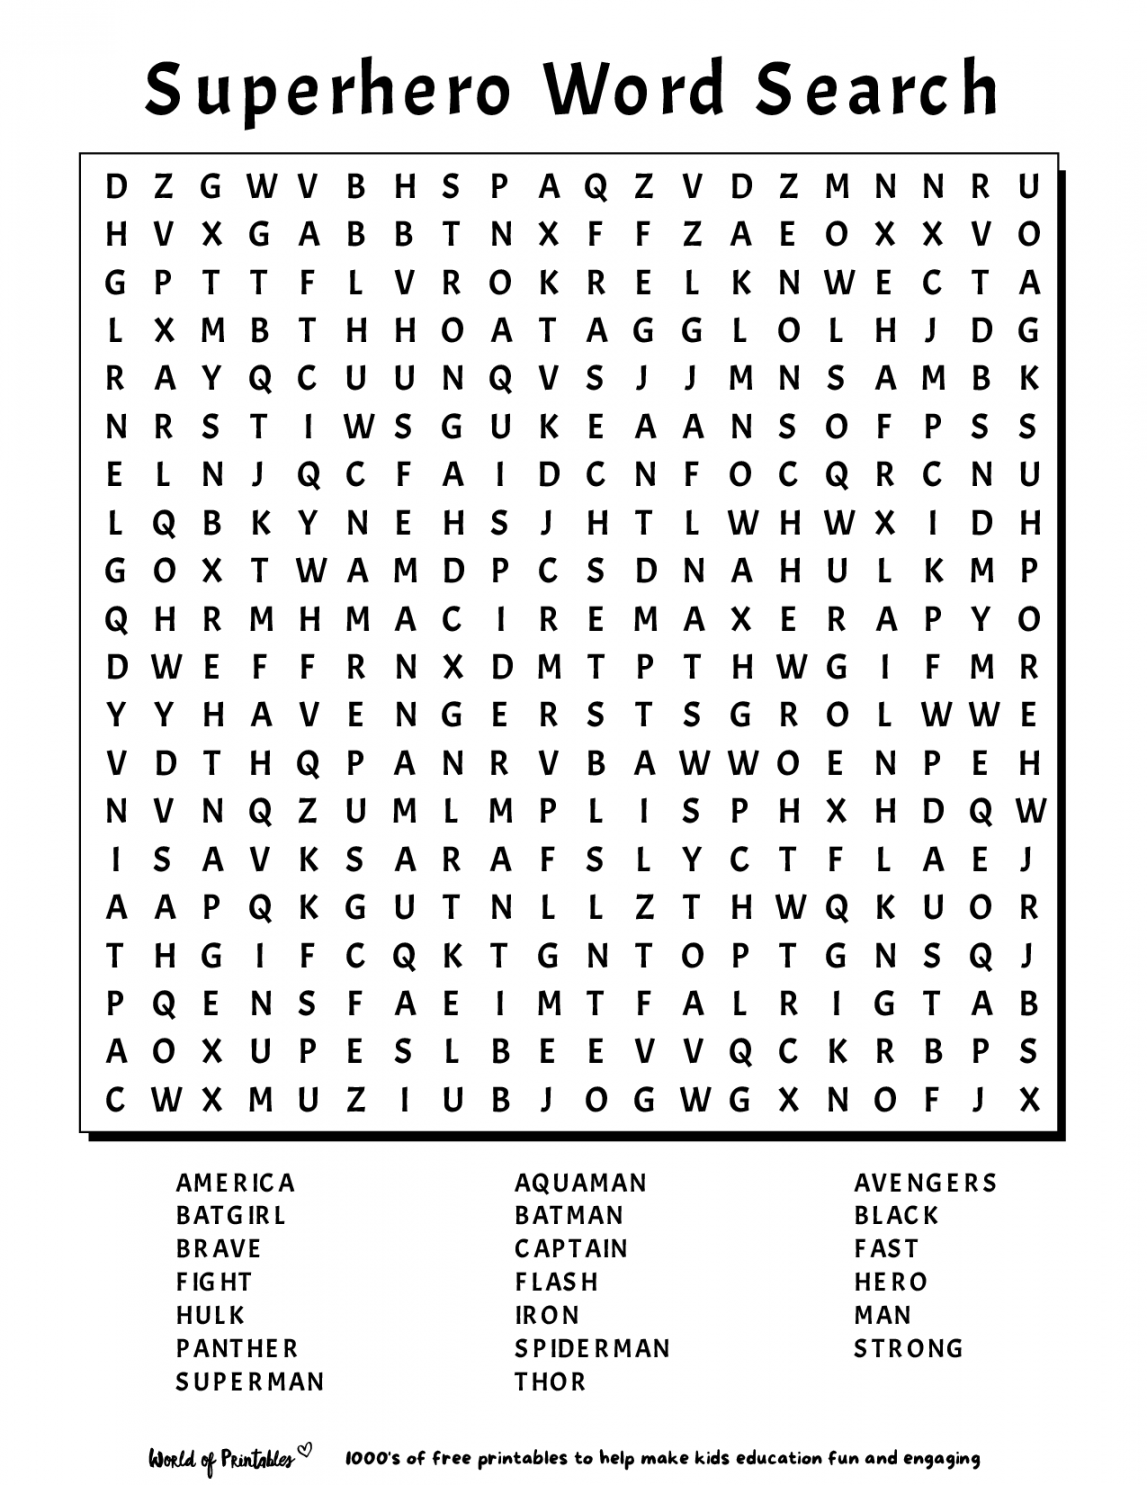 Free Printable Word Searches For Adults - Printable - Printable Word Search  World of Printables